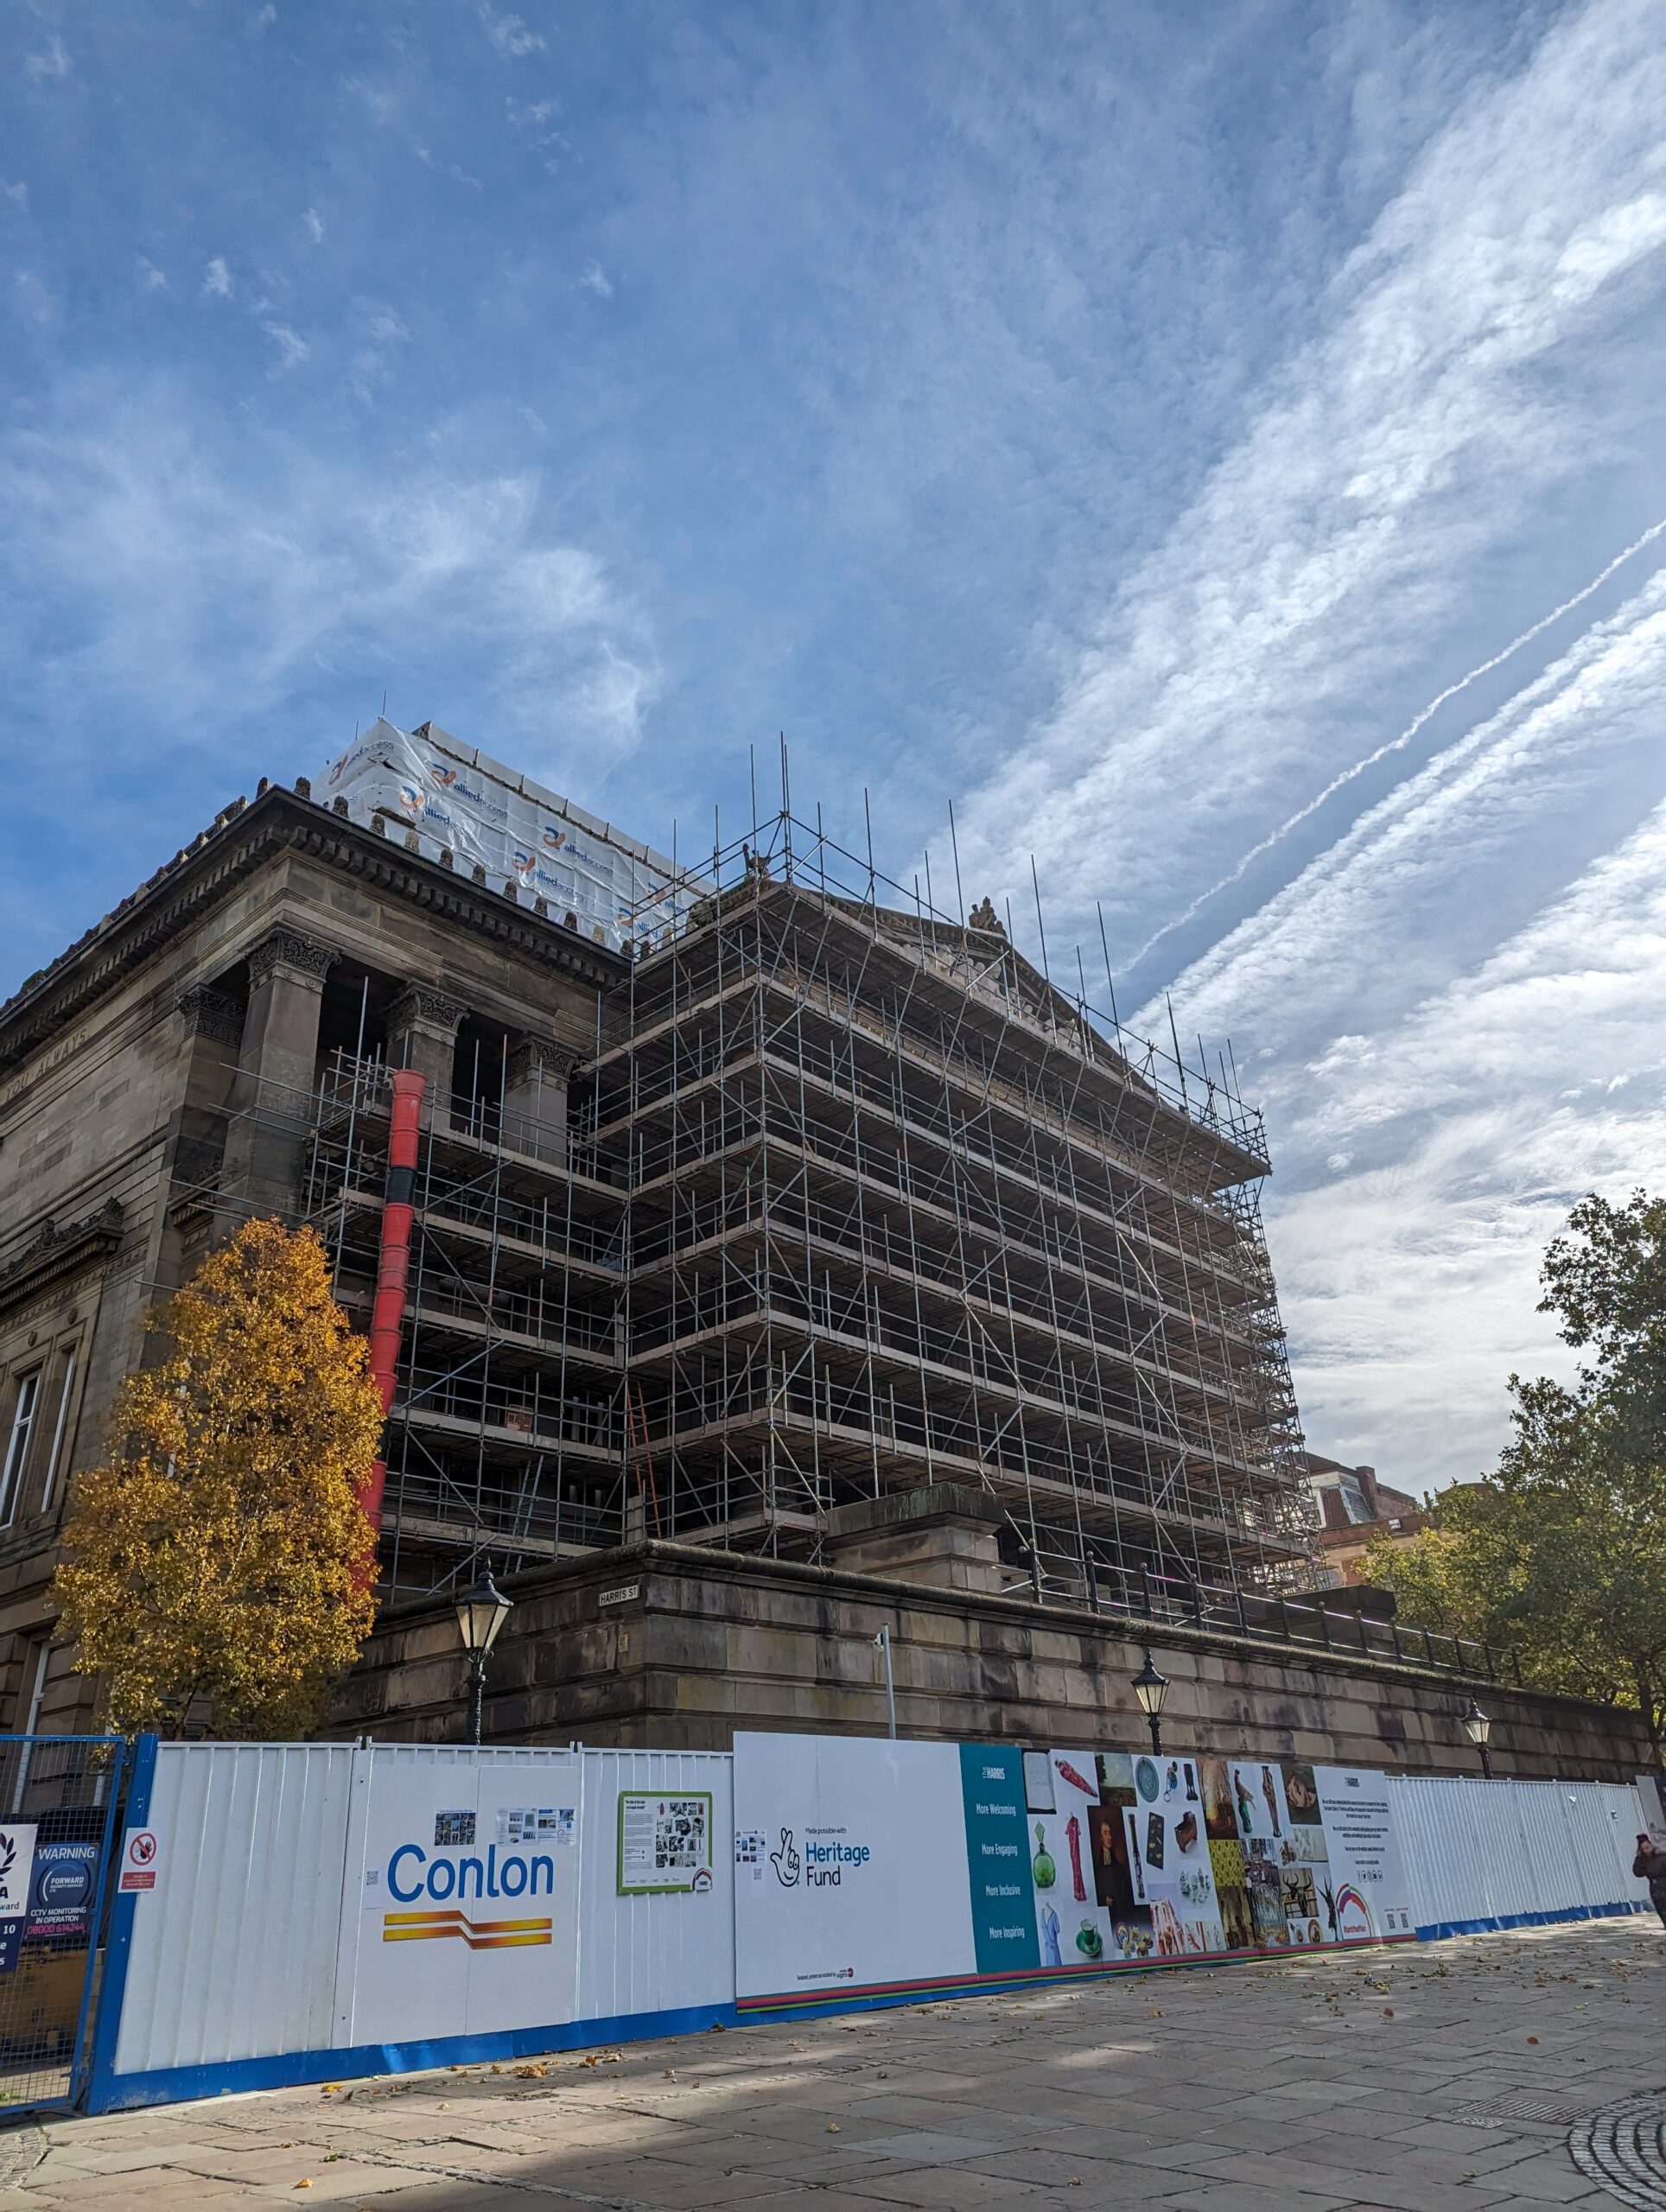 Scaffolding covering the façade of the Harris building.